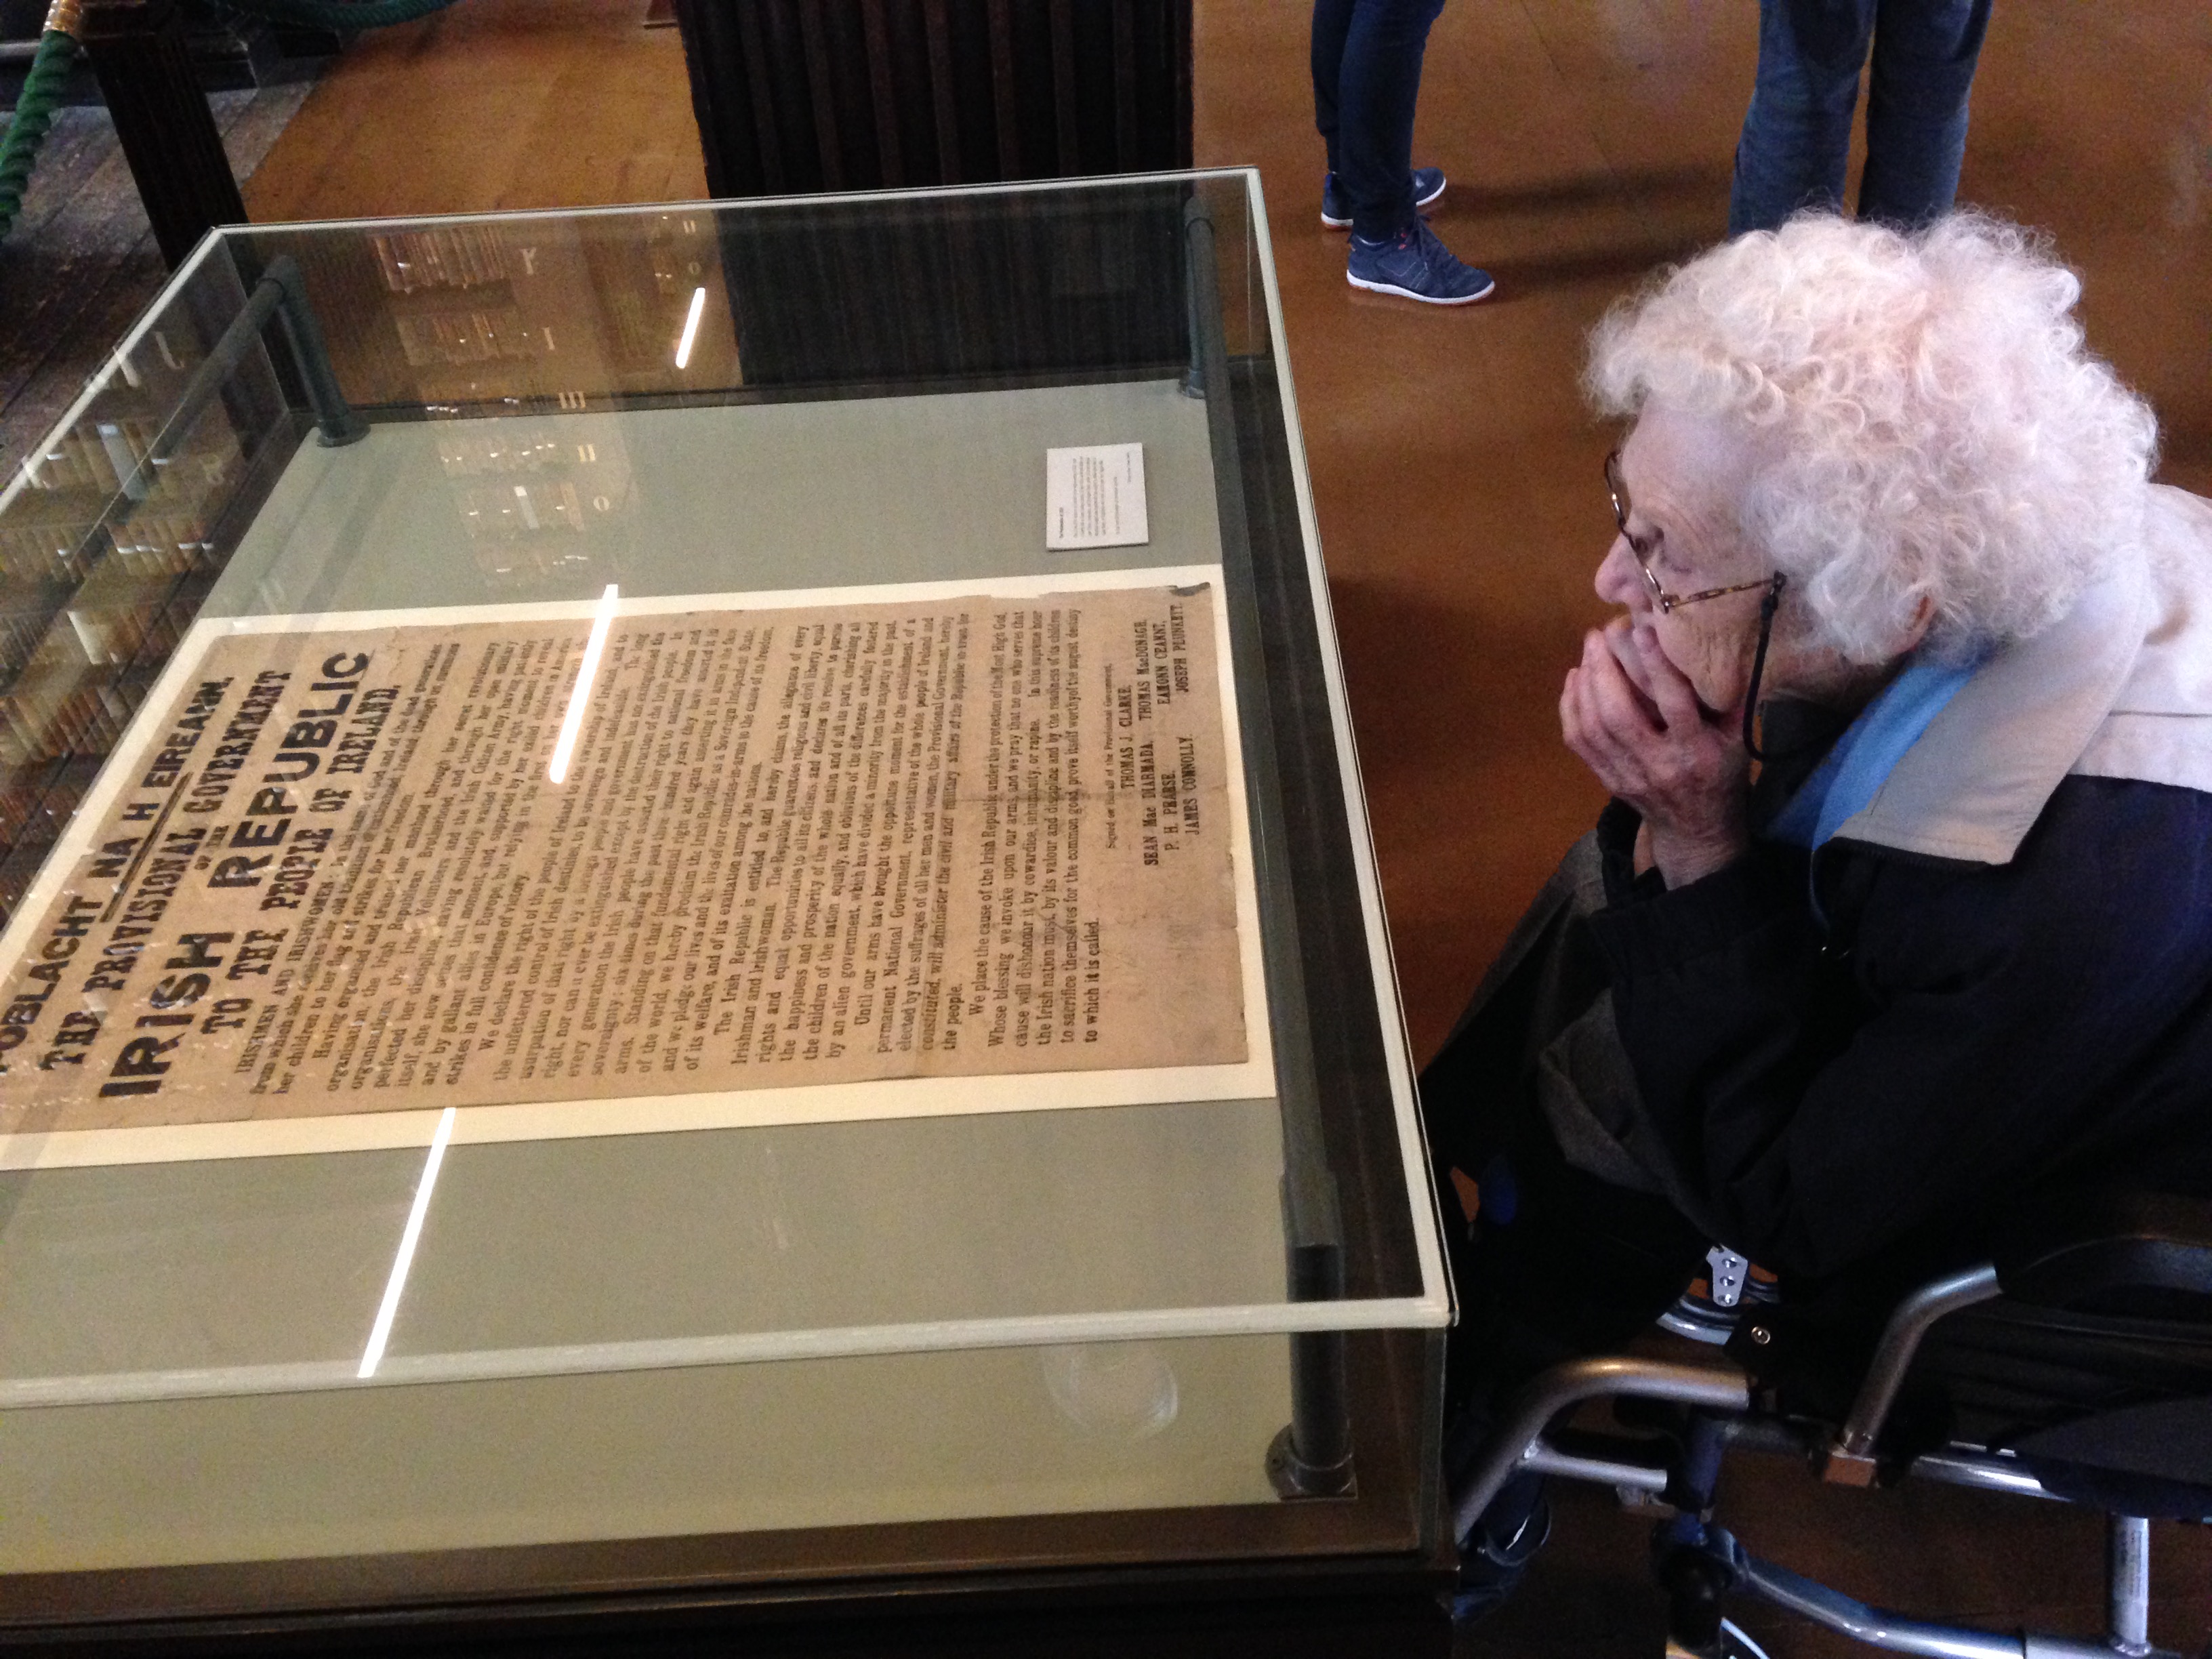 Roberta, savoring the thought of Irish independence. Looking at the 100-year-old Proclamation in the Trinity College library. Photo by Sara Burrus.